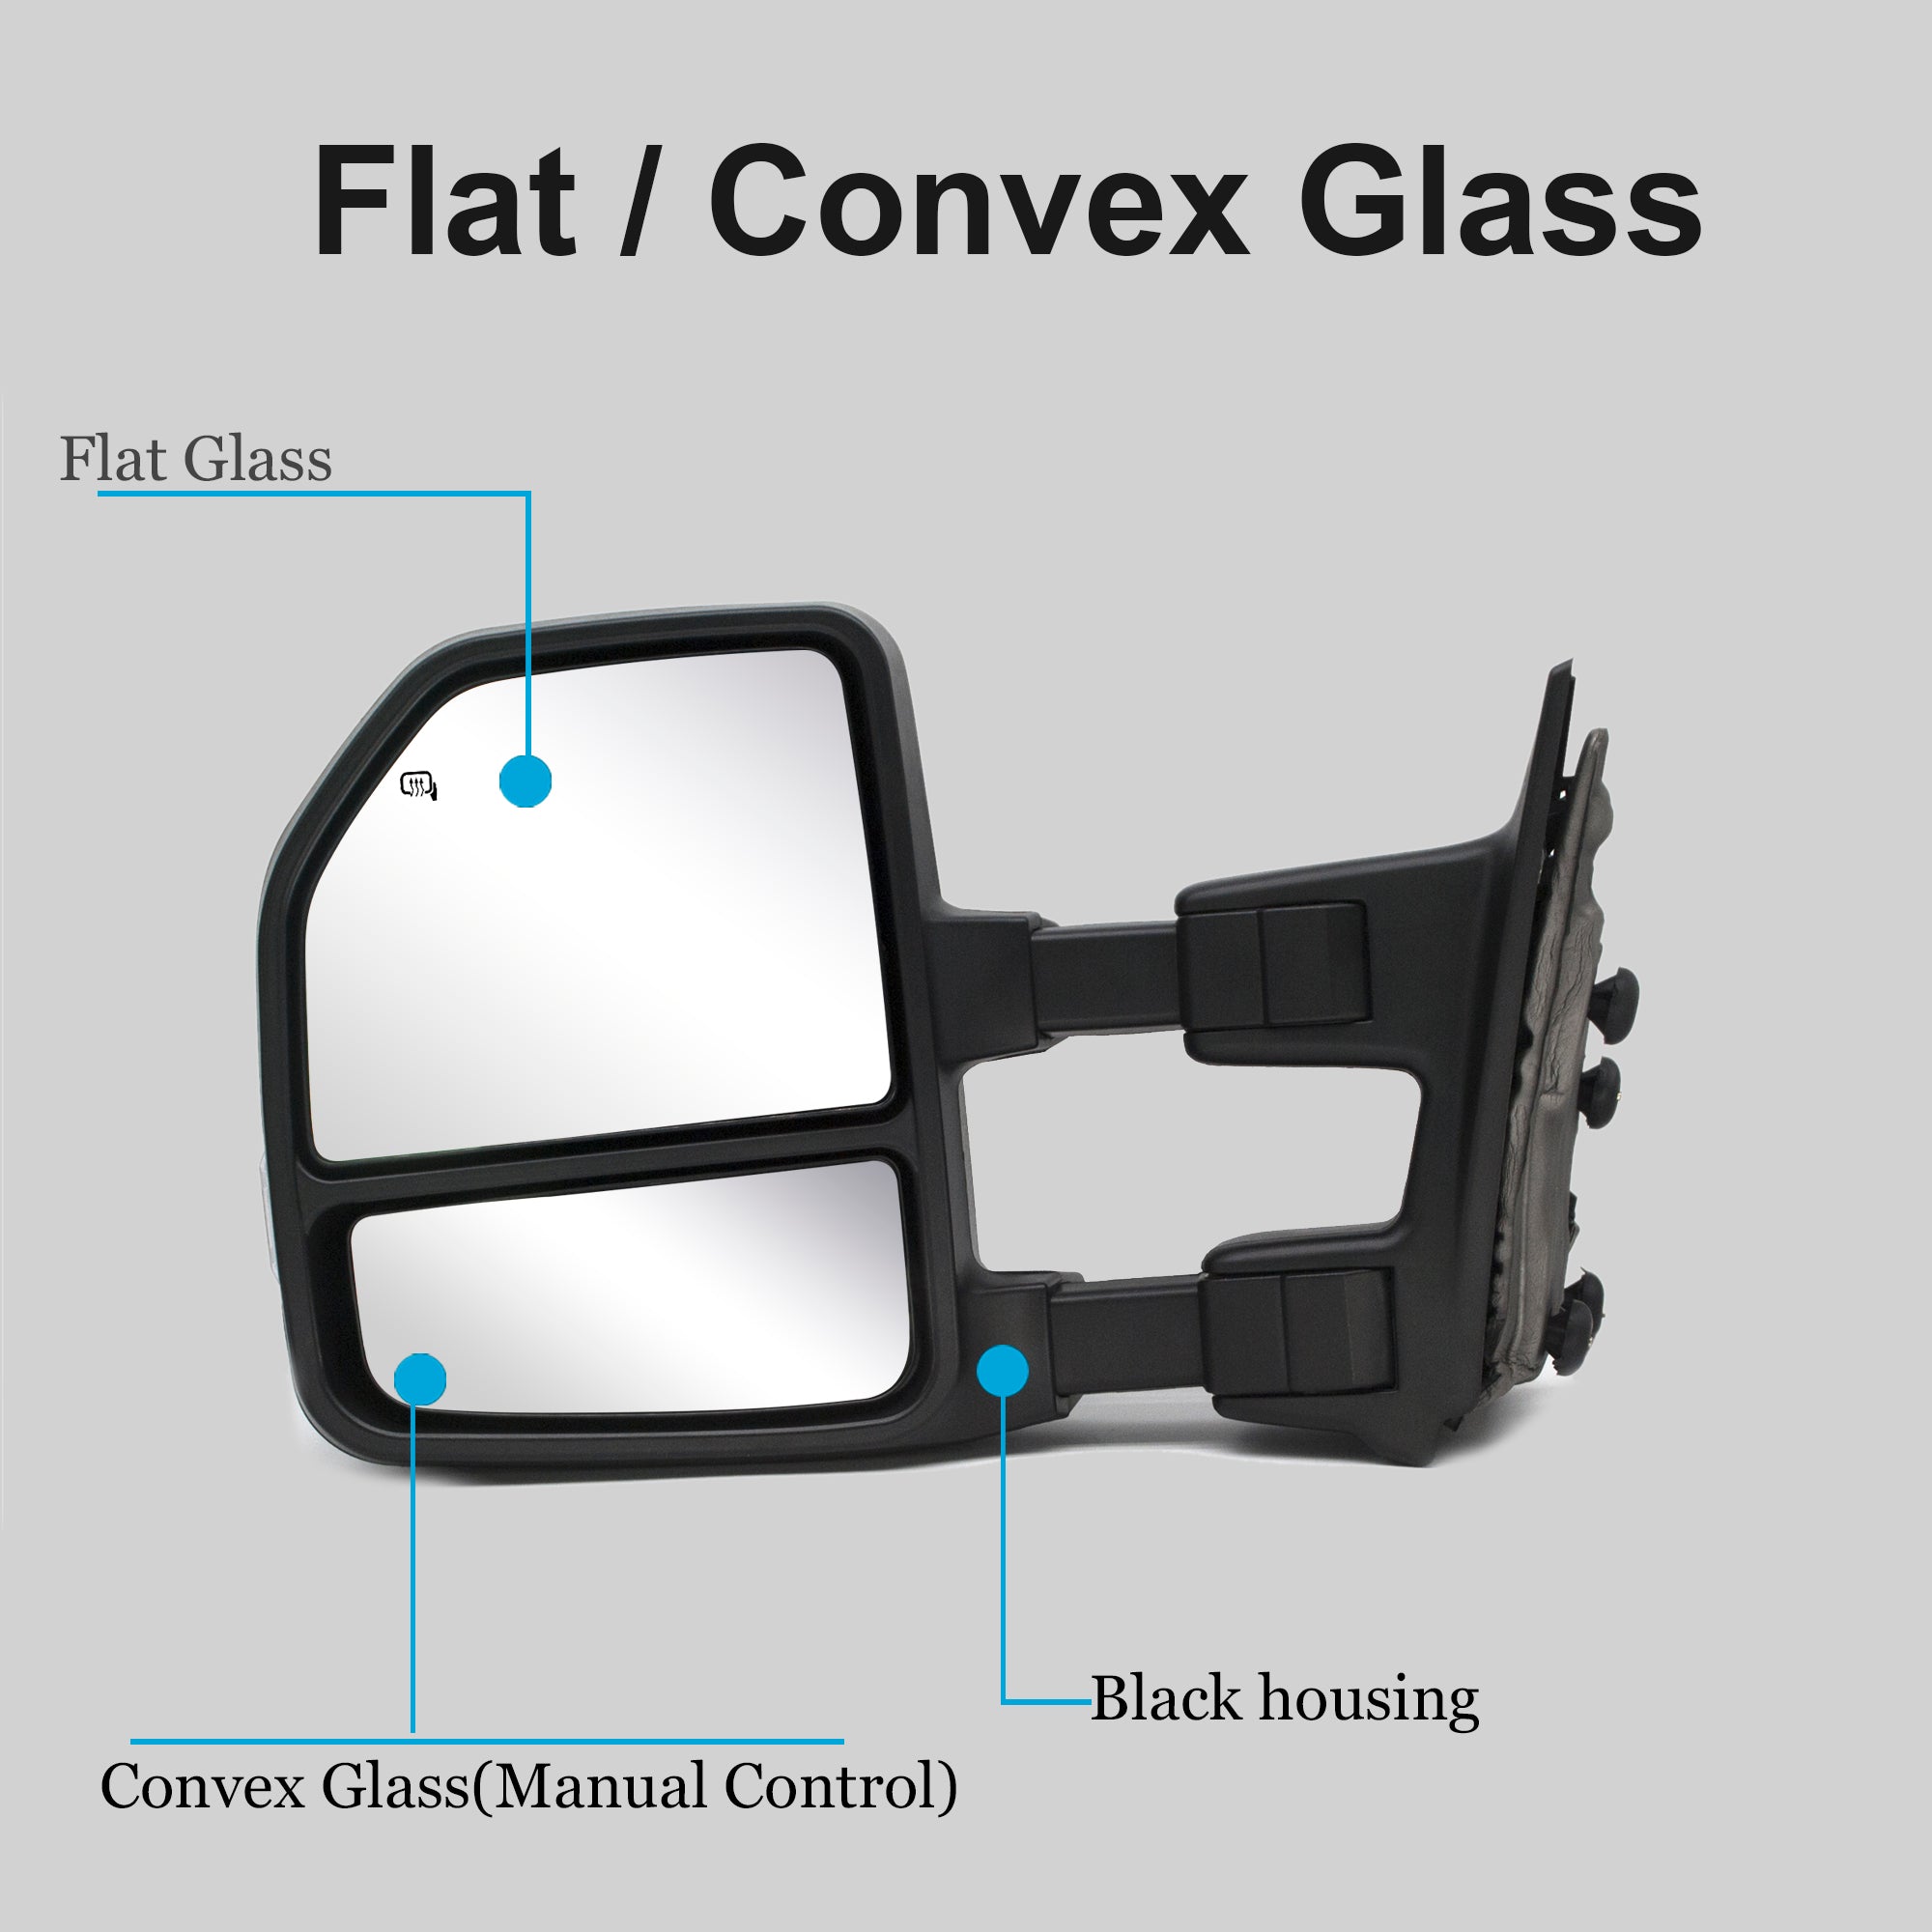 Towing Mirrors for 1999-2016 Ford F250 F350 F450 F550 Super Duty Manual Adjustment Glass Manual Extendable 18B